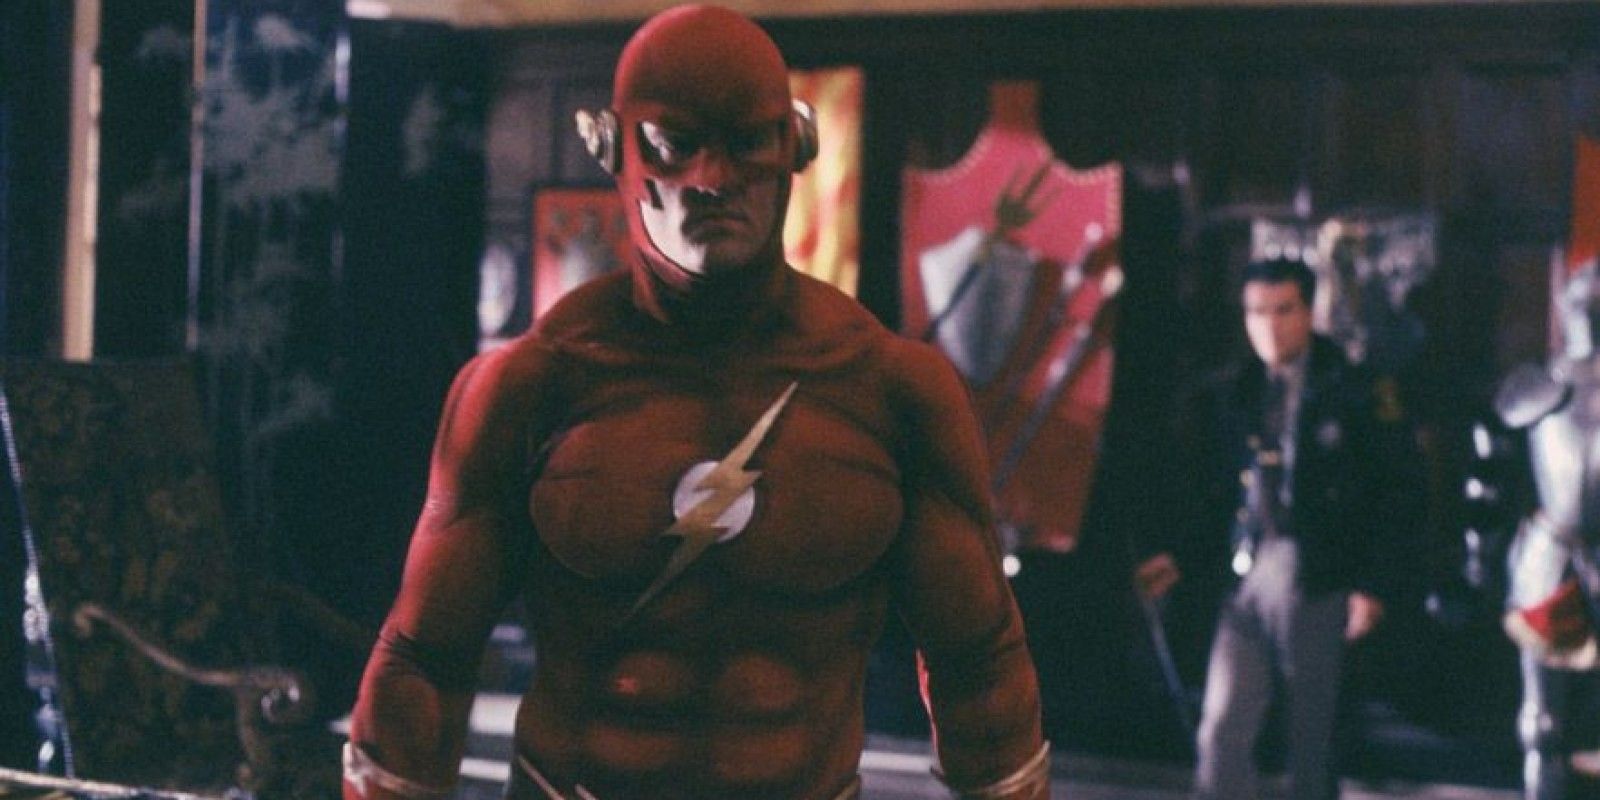 Why the 90s Flash TV Series Was Canceled